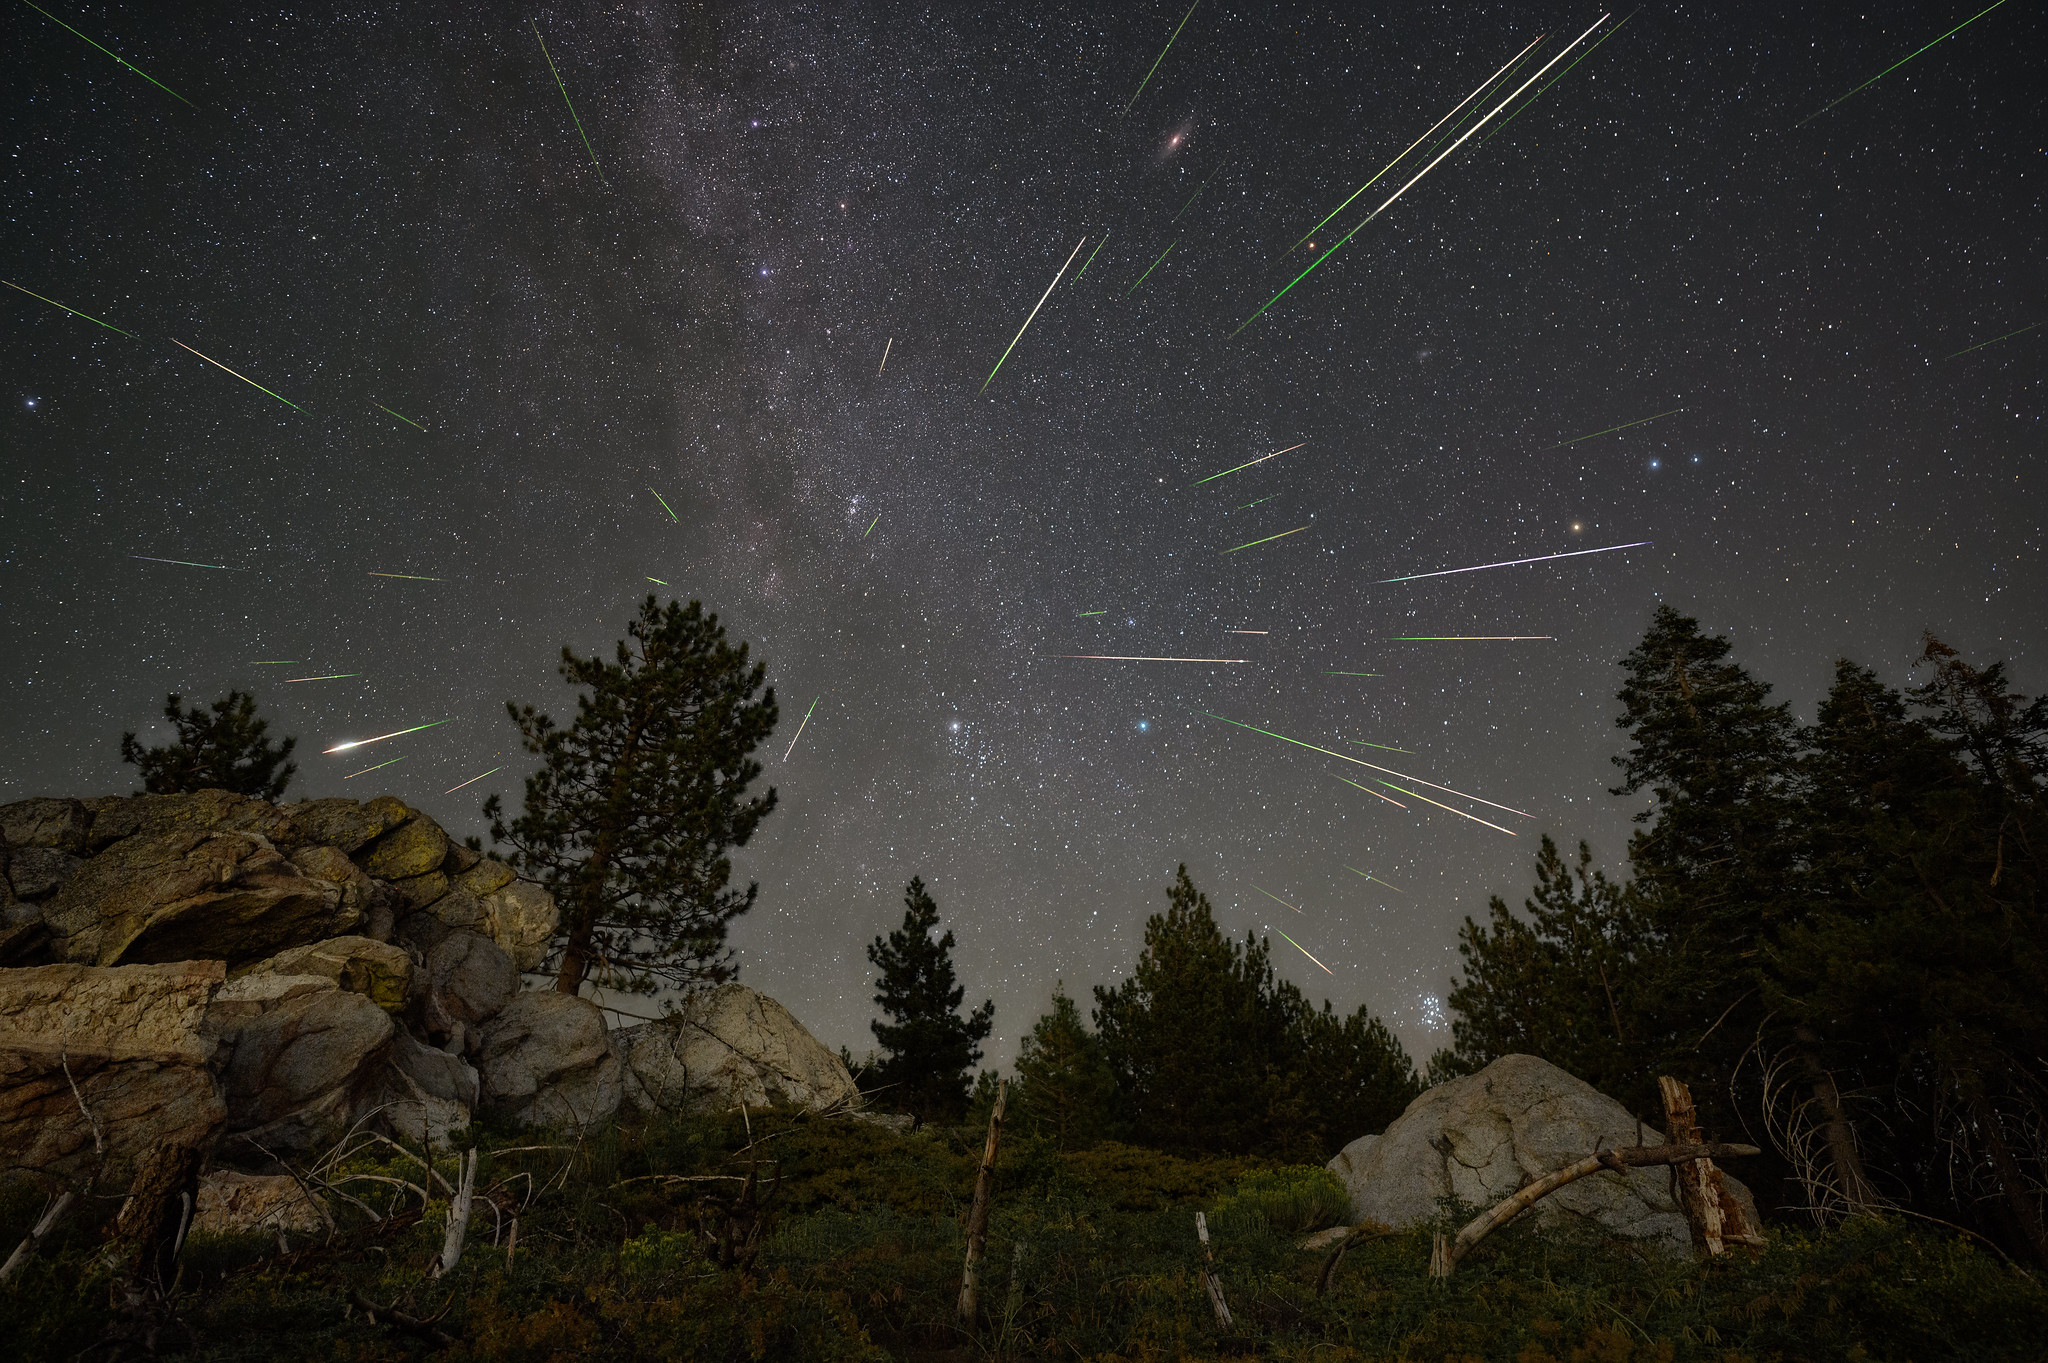 Meteors from the Perseids meteor shower streak across the night sky above Sequoia National Forest.